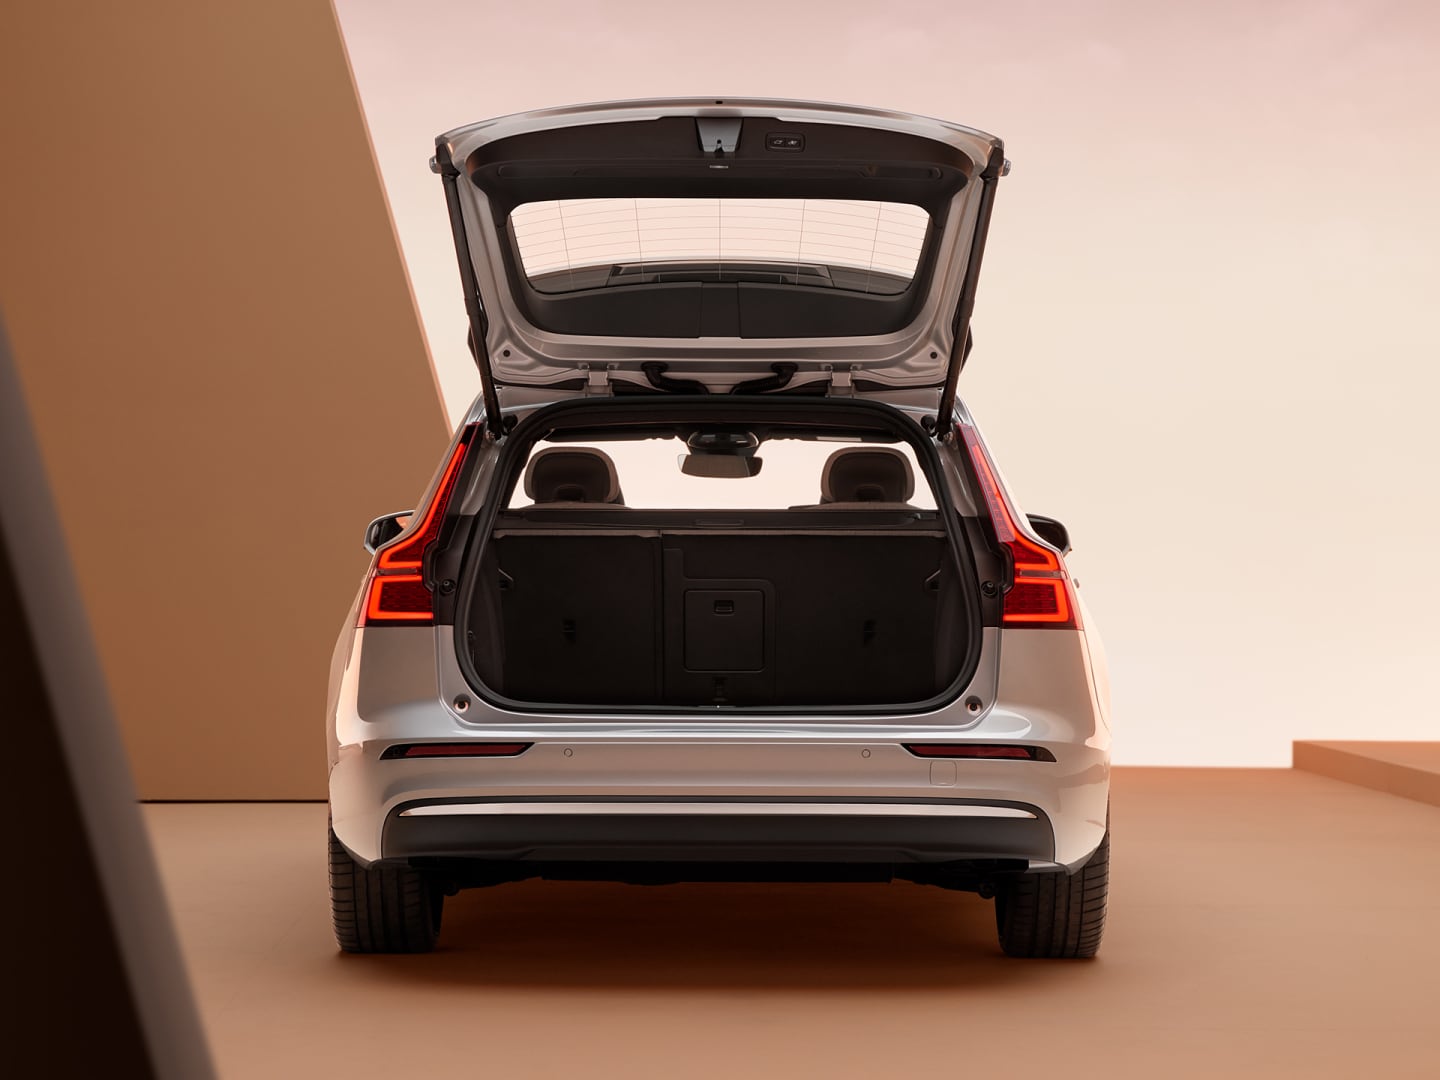 Volvo V60 plug-in hybrid boot with large storage space.